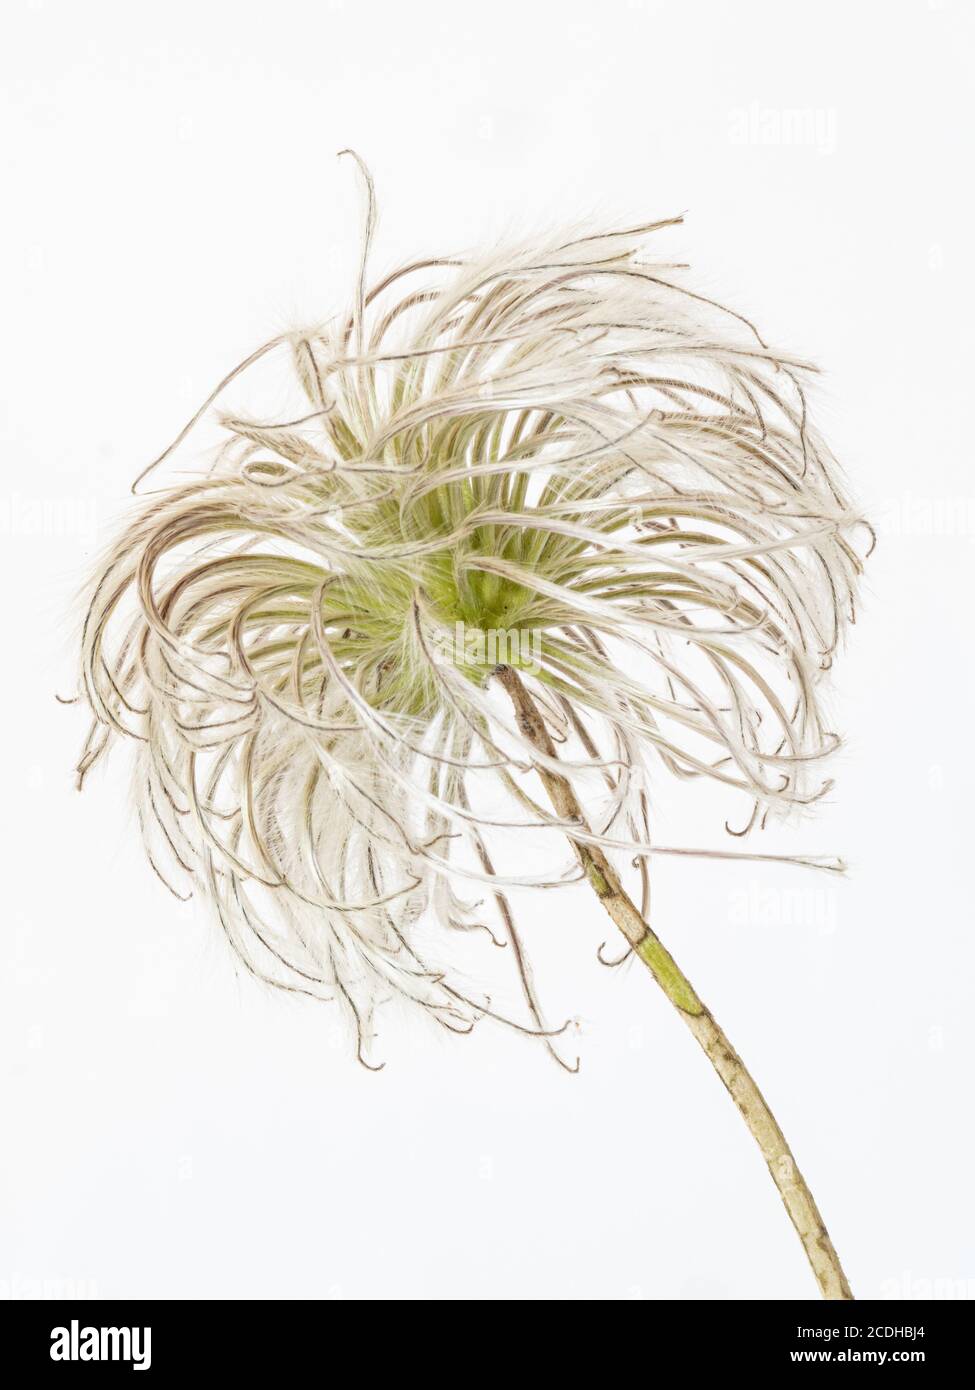 A close up of a single fluffy seed head of Clematis alpina against a plain white background Stock Photo